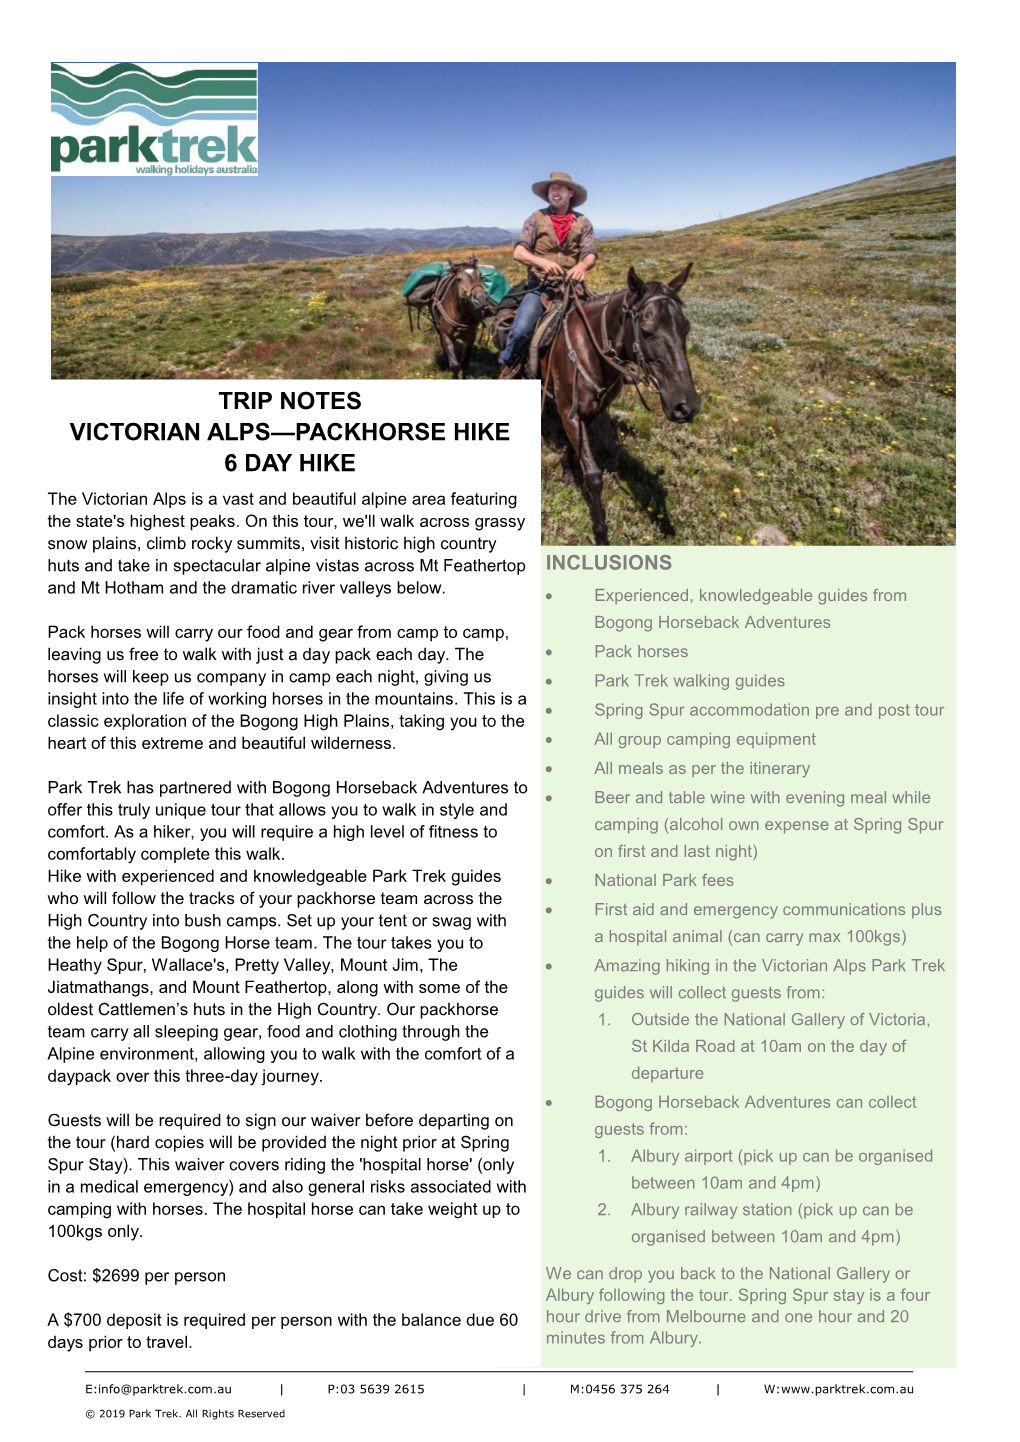 Trip Notes Victorian Alps—Packhorse Hike 6 Day Hike